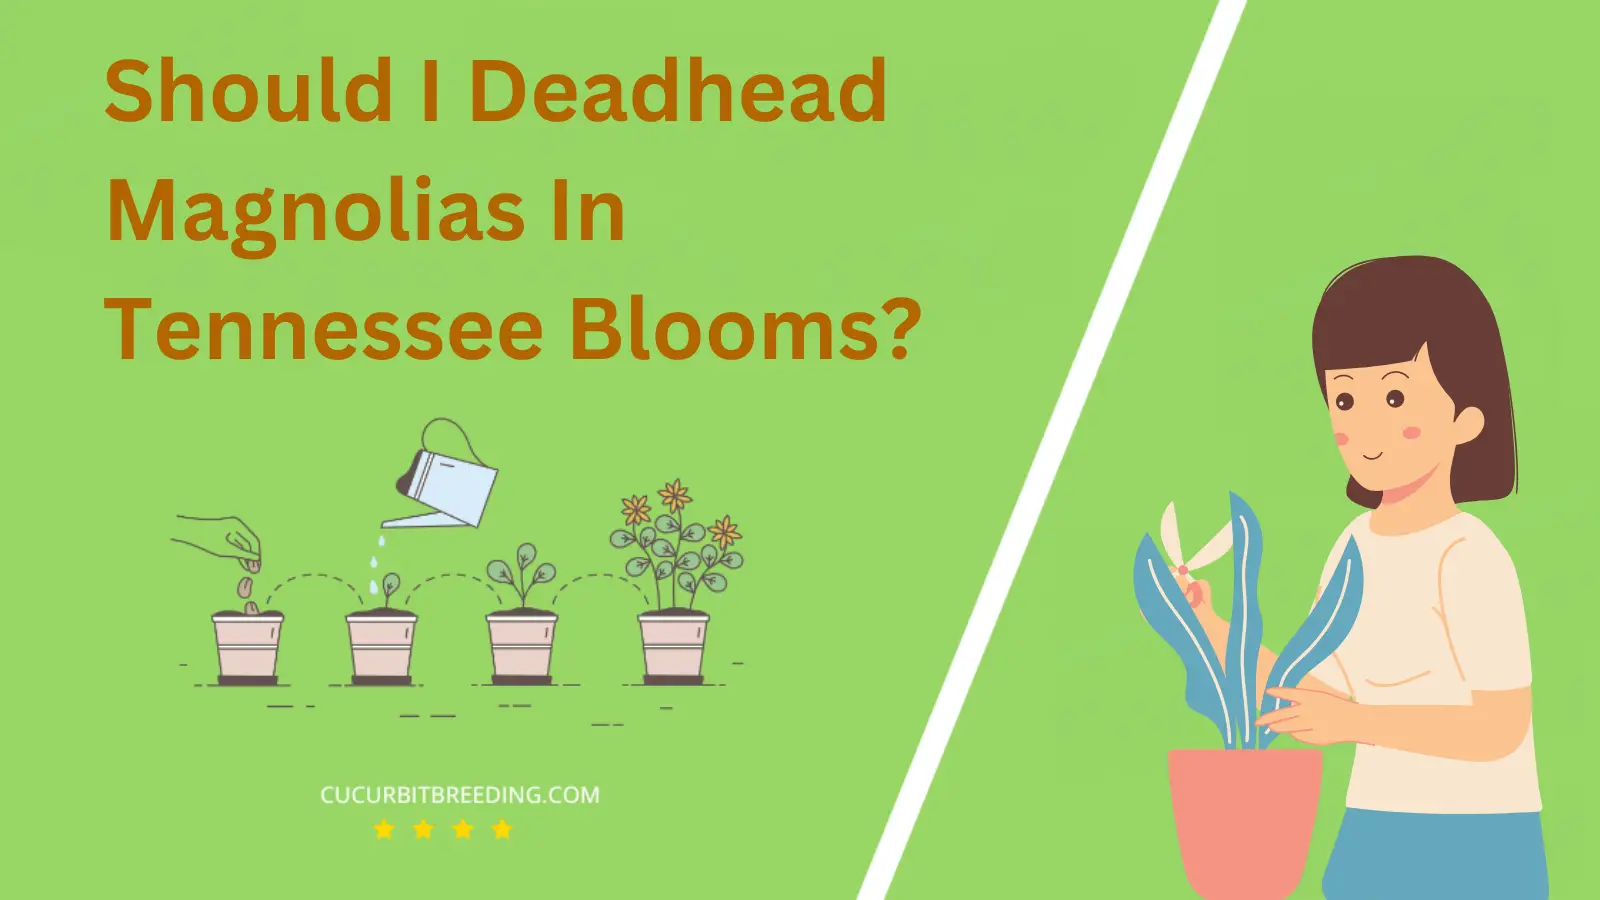 Should I Deadhead Magnolias In Tennessee Blooms?